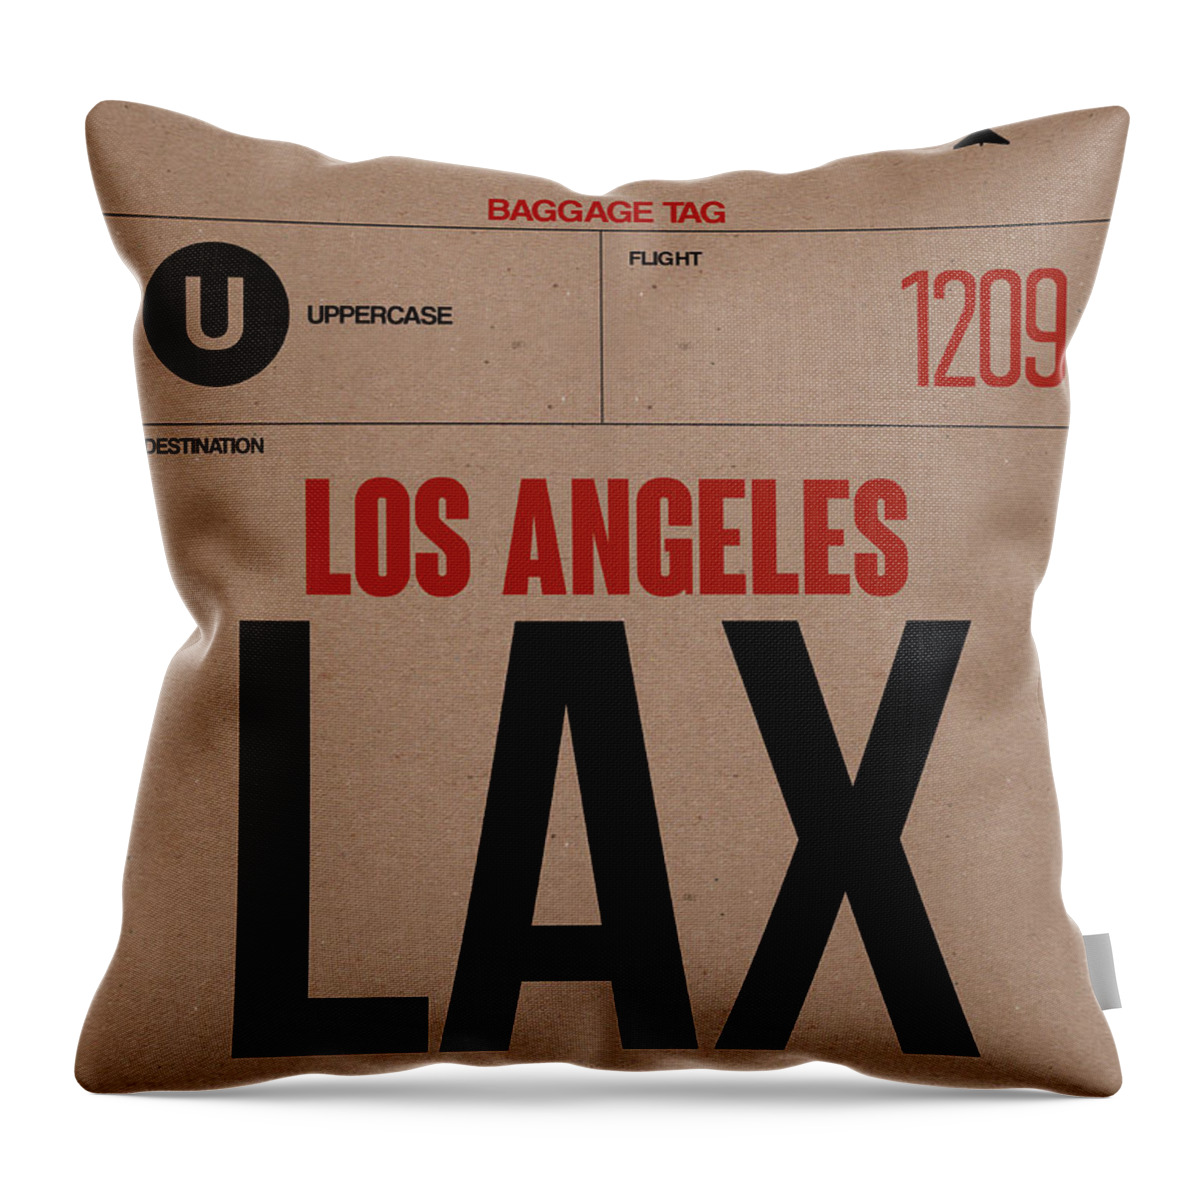 Los Angeles Throw Pillow featuring the digital art Los Angeles Luggage Poster 1 by Naxart Studio